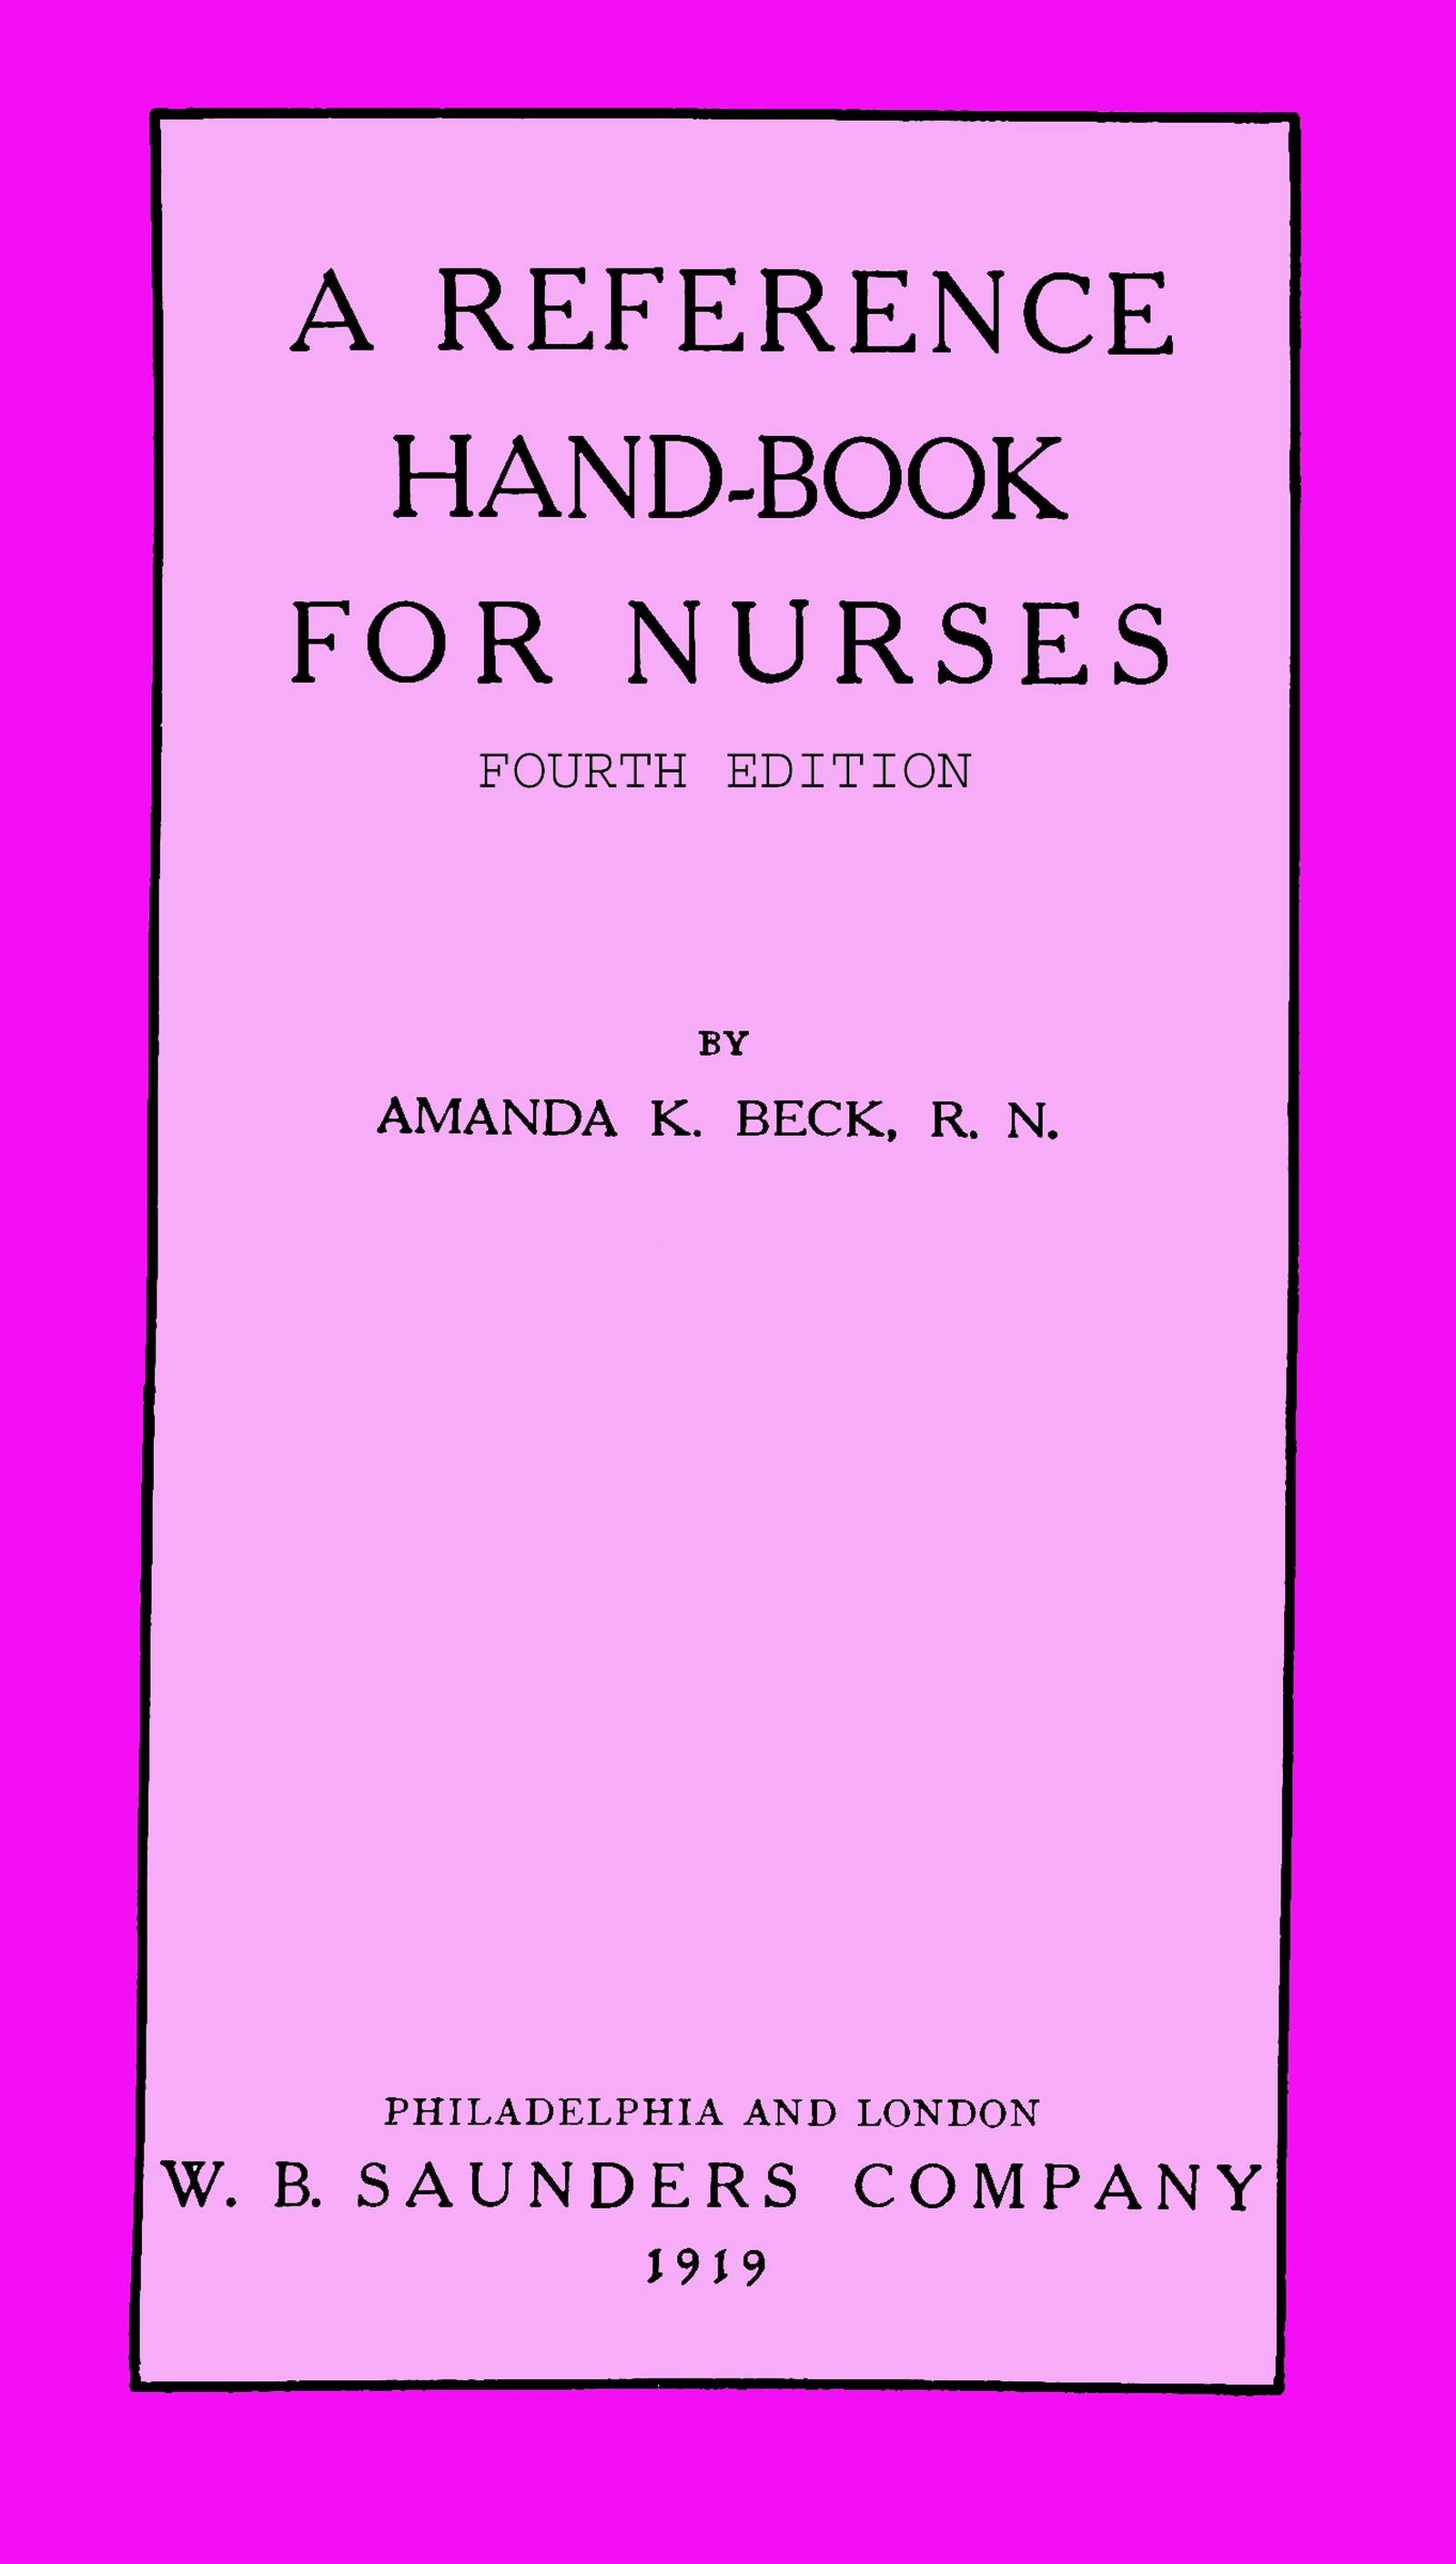 A reference hand-book for nurses